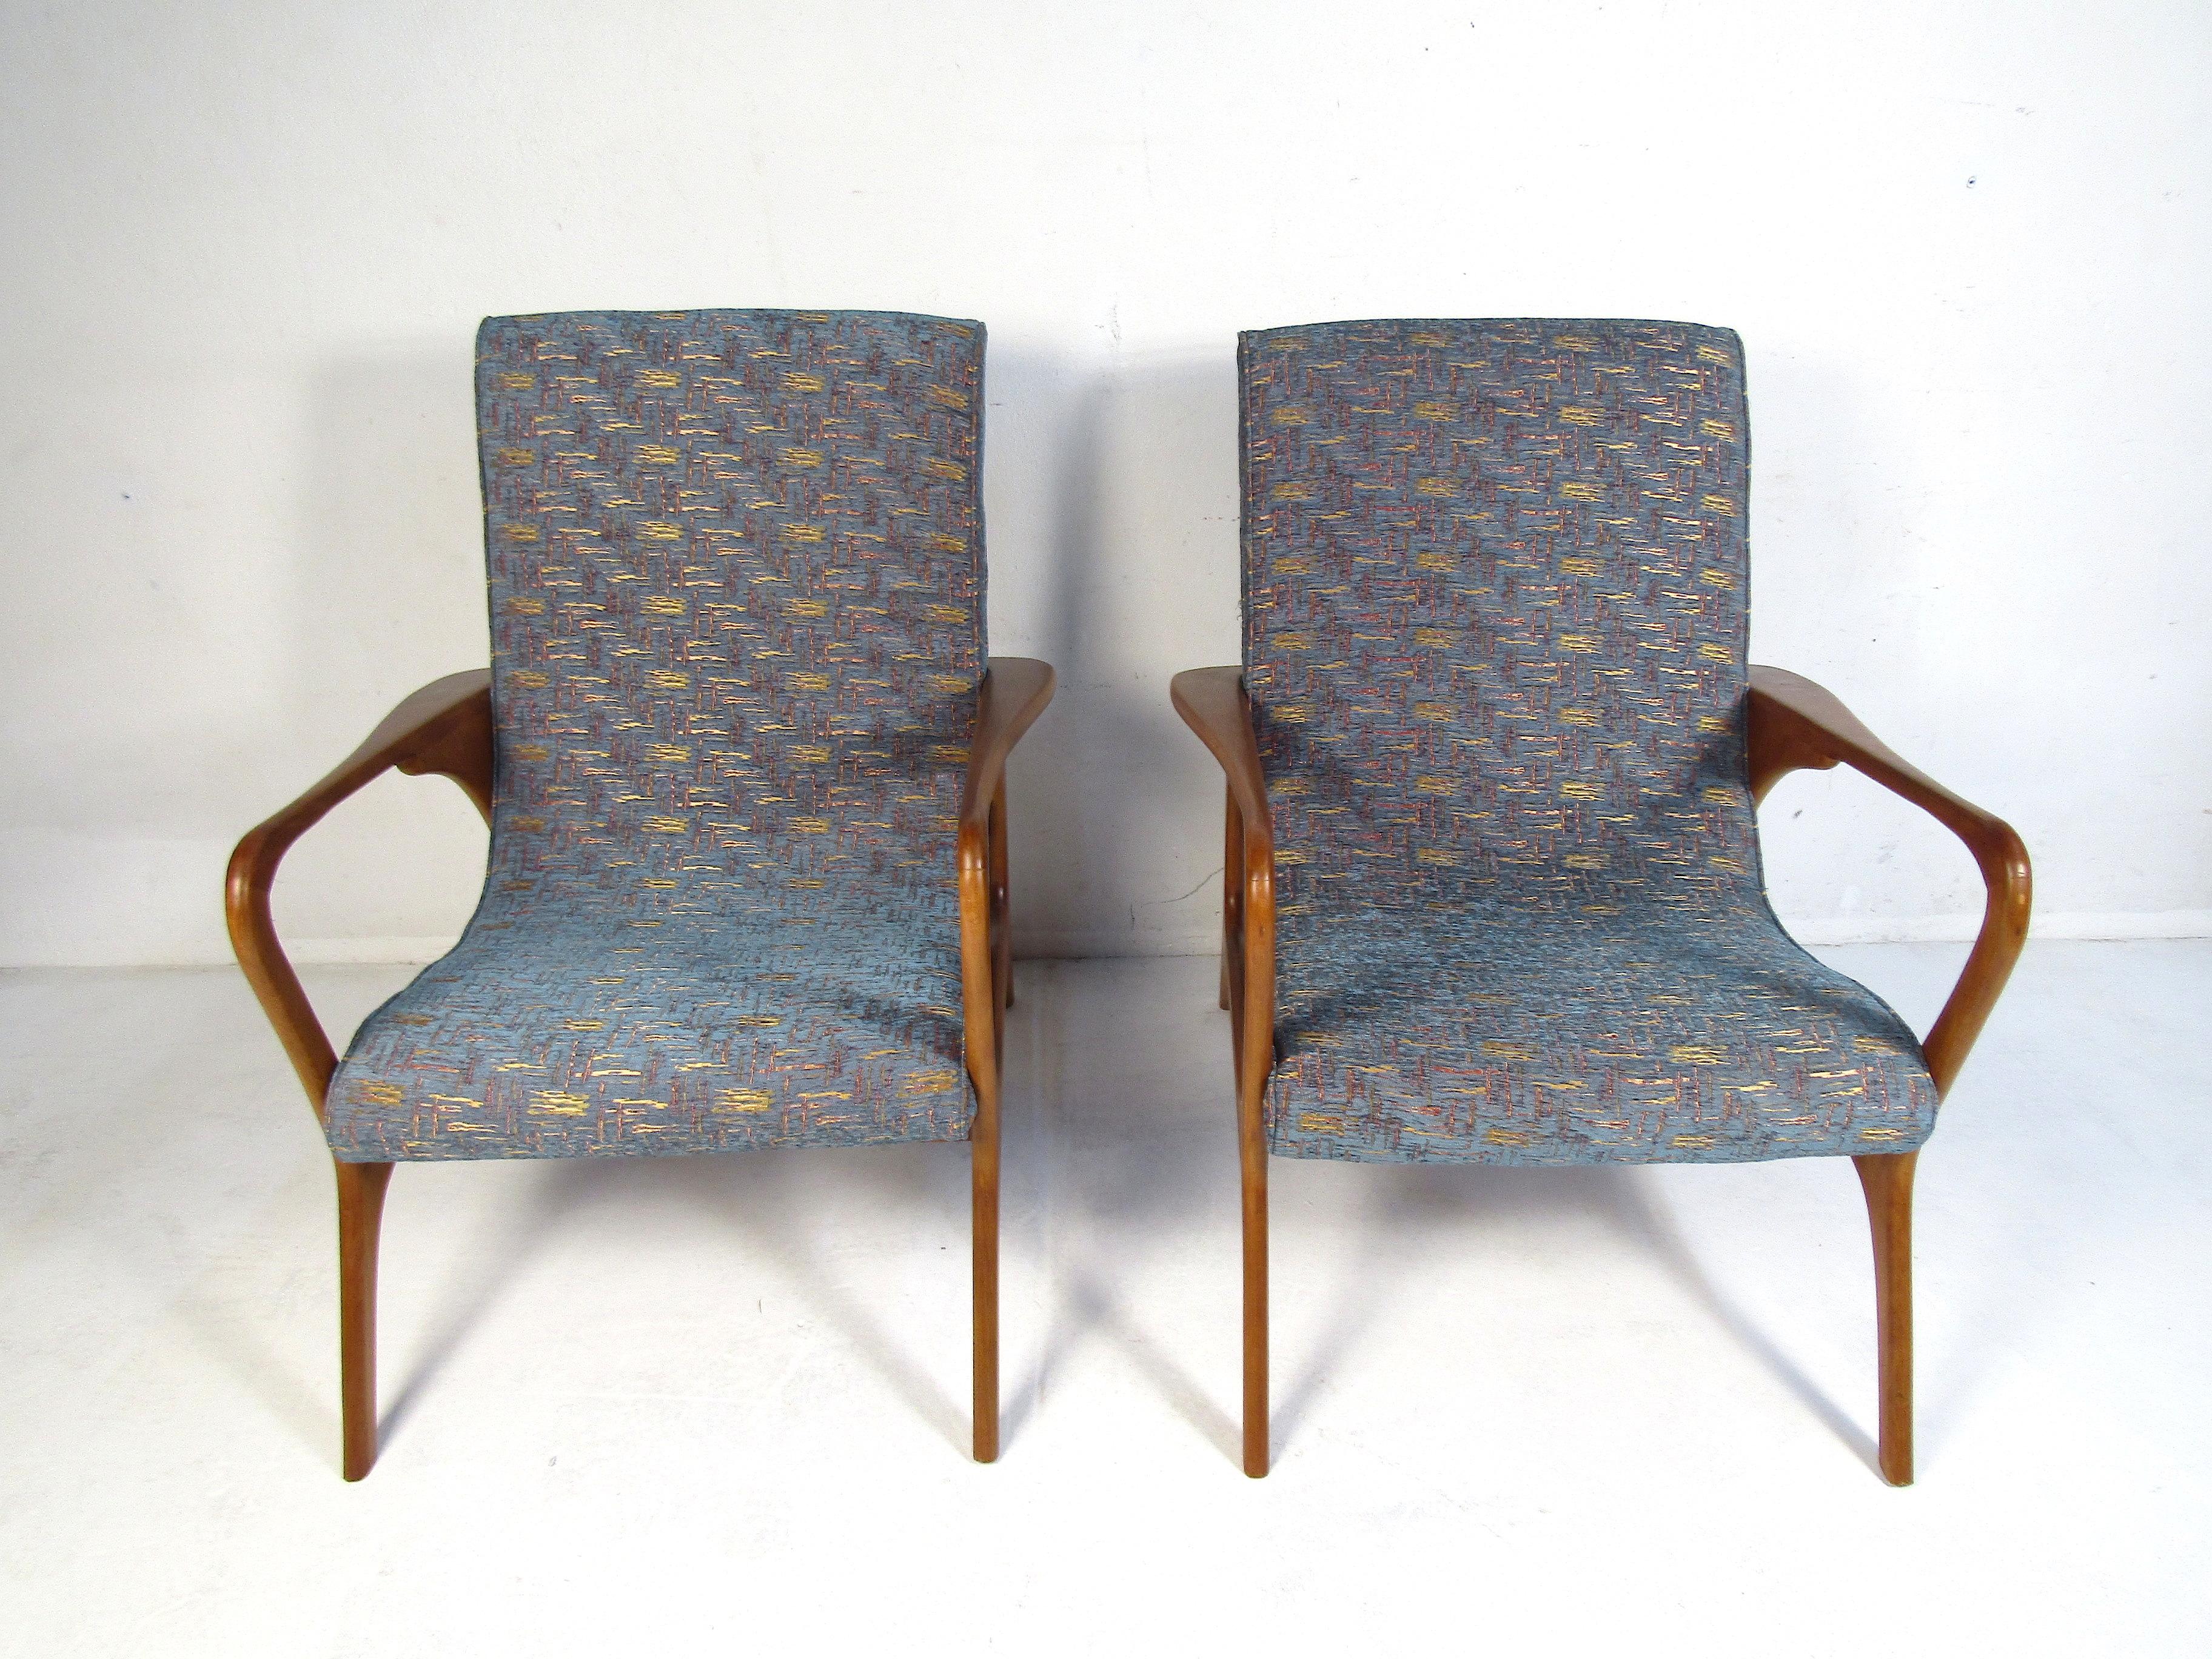 Stylish pair of midcentury lounge chairs. Sculpted frame with an interesting profile. Nice addition to any modern interior. Please confirm item location with dealer (NJ or NY).